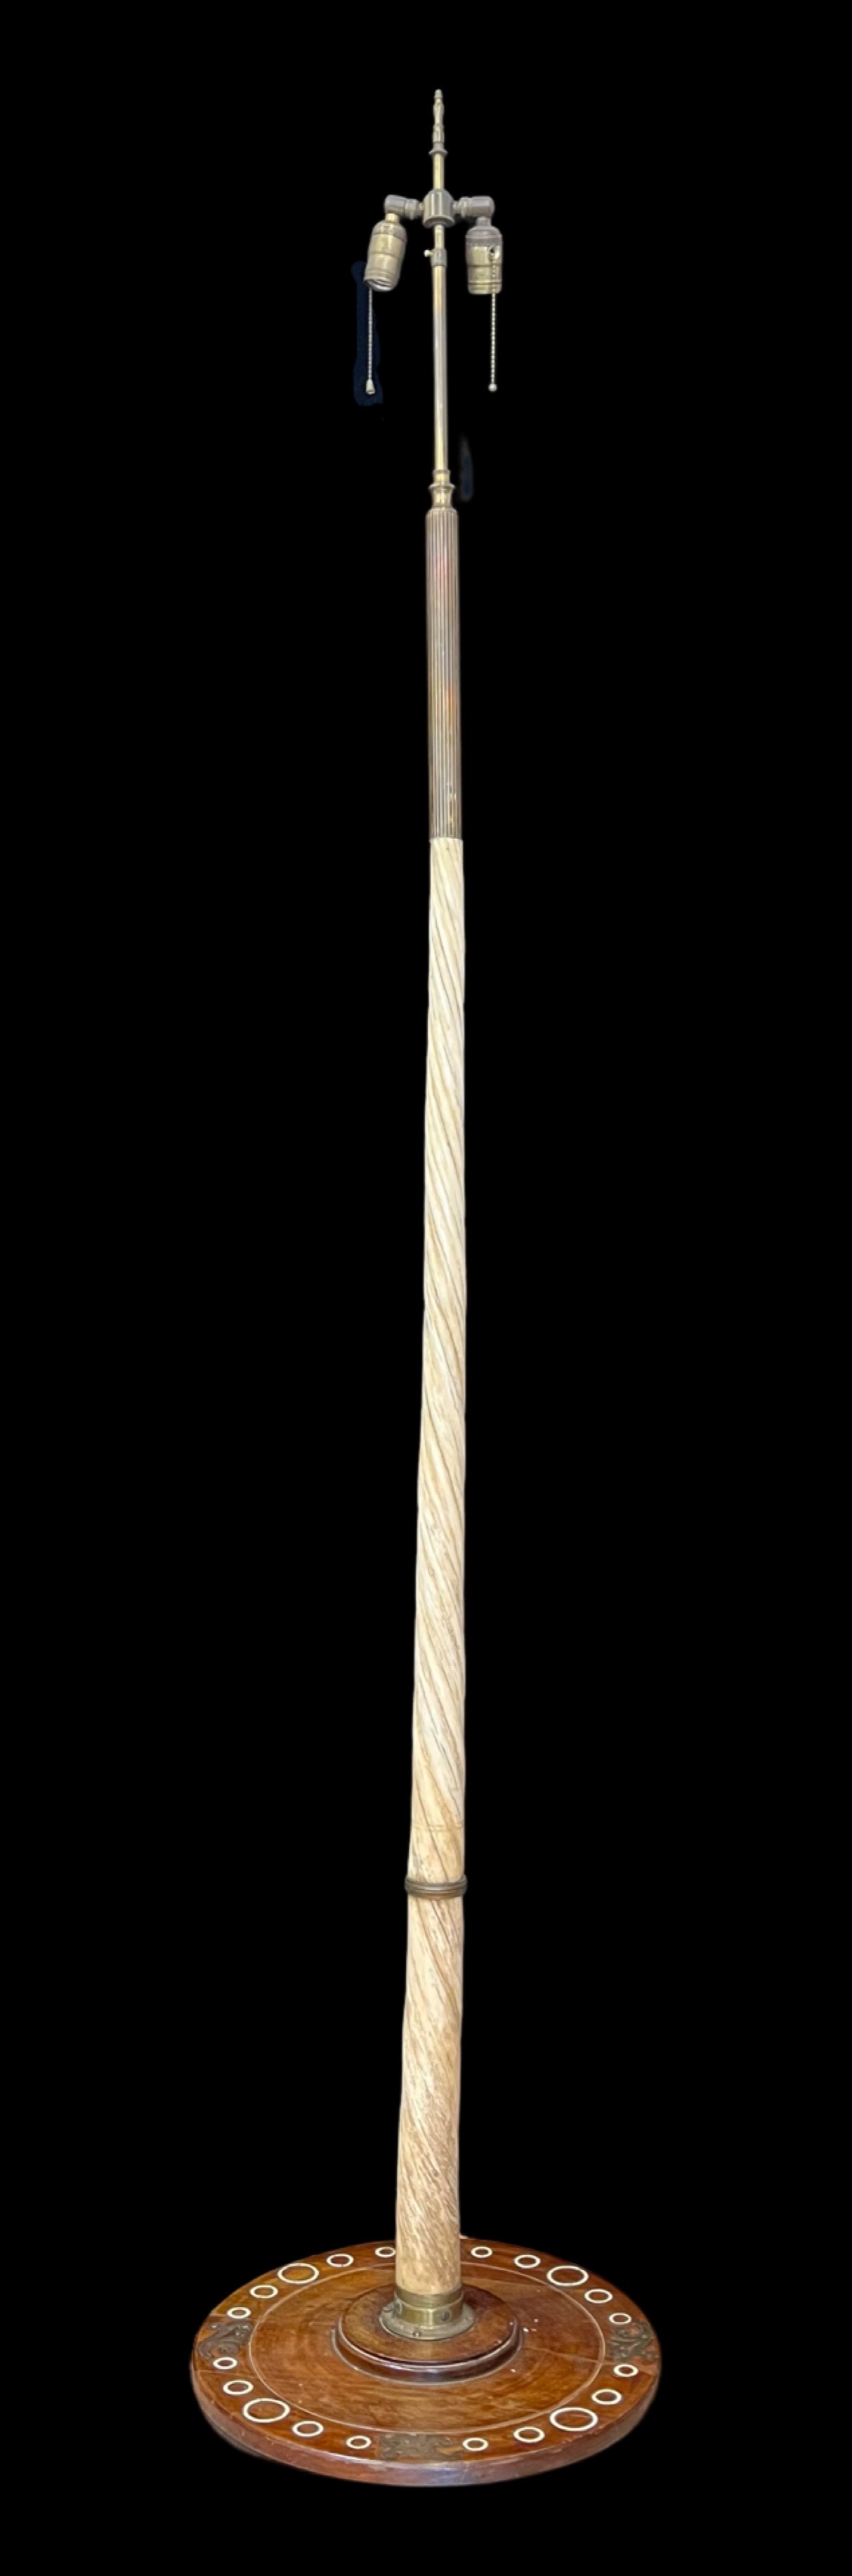 A NARWHAAL TUSK (MONODON MONOCEROS), EARLY 20TH CENTURY, MOUNTED AS A FLOORSTANDING LAMP